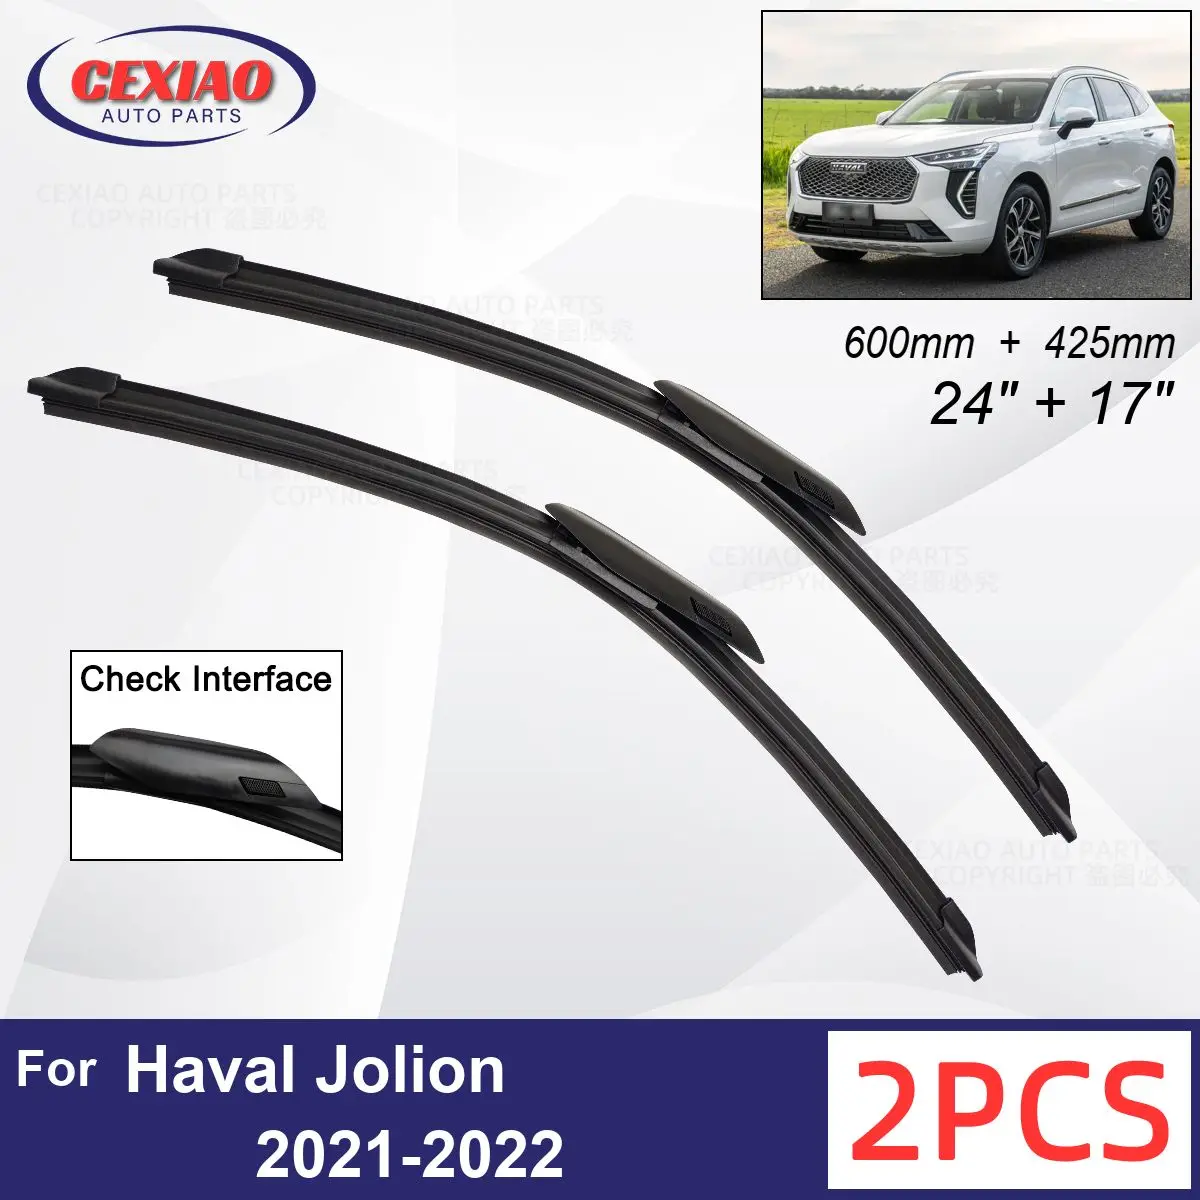 

Car Wiper For Haval Jolion 2021-2022 Front Wiper Blades Soft Rubber Windscreen Wipers Auto Windshield 24" 17" 600mm 425mm